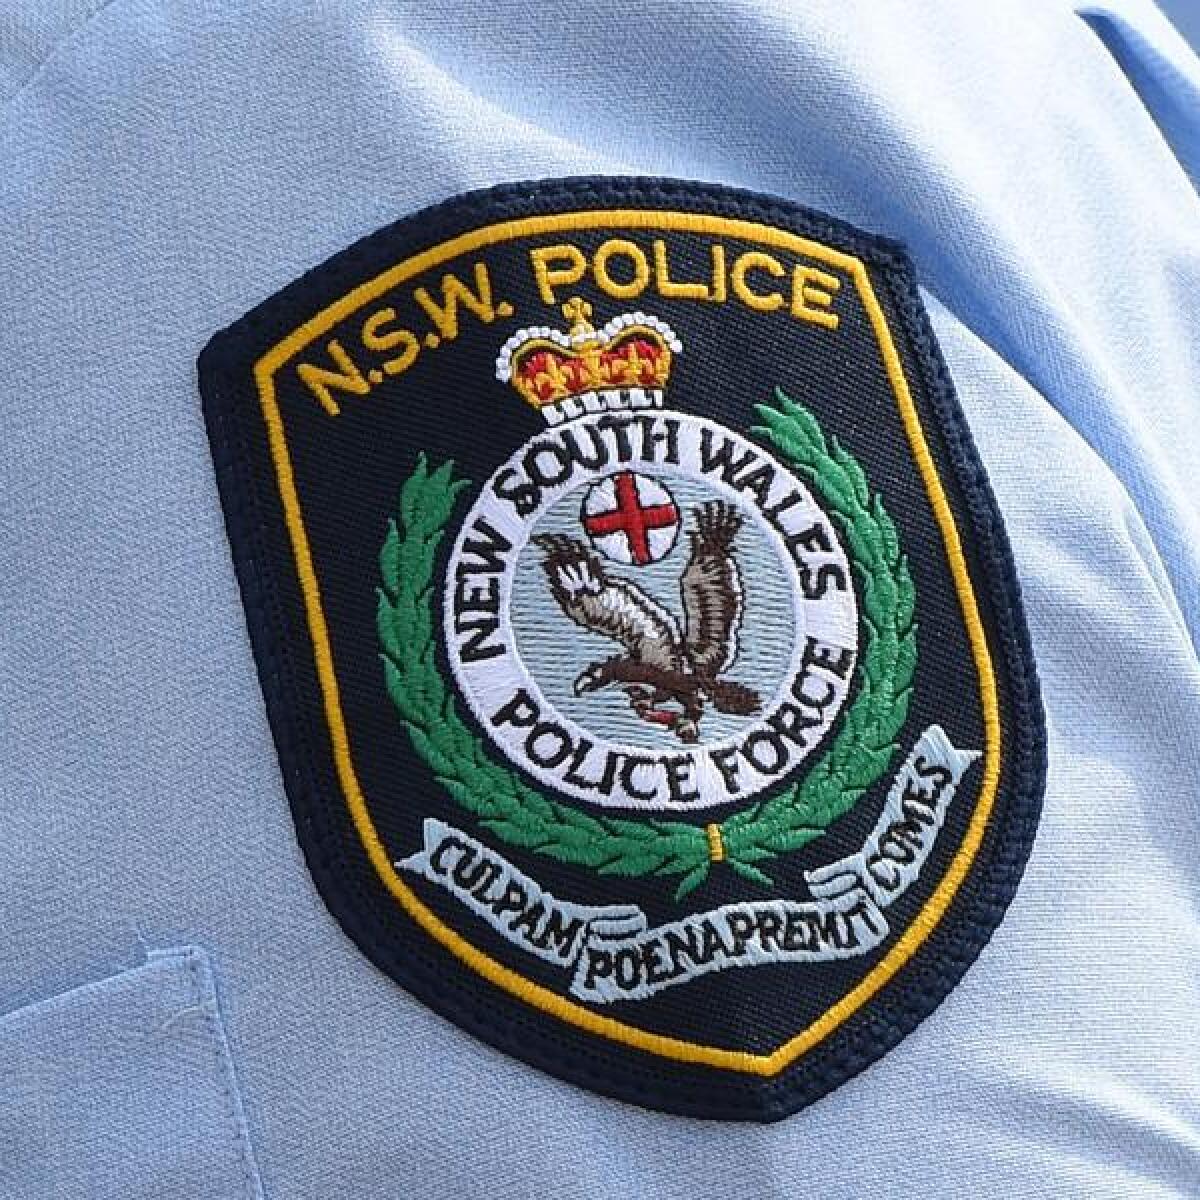 A NSW Police badge